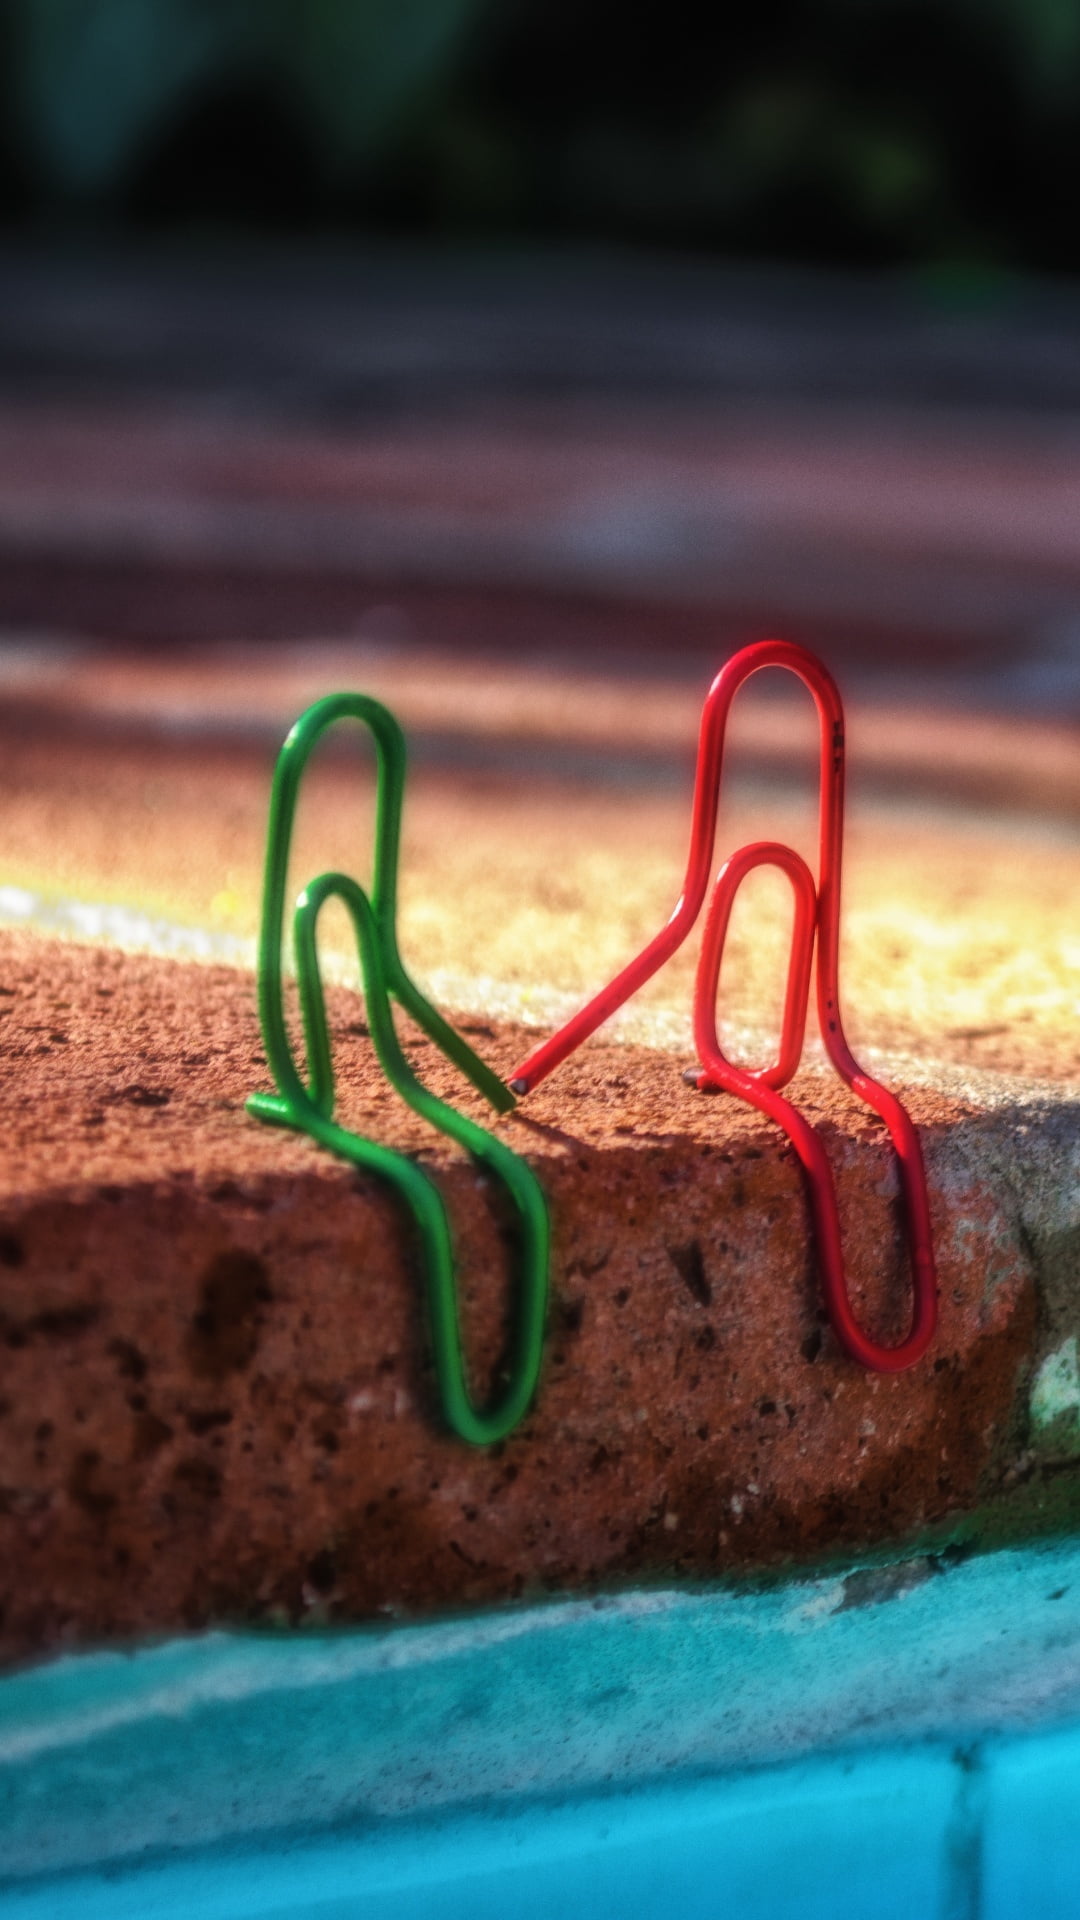 Staples Couple, two green and red paper clips, Love, close-up